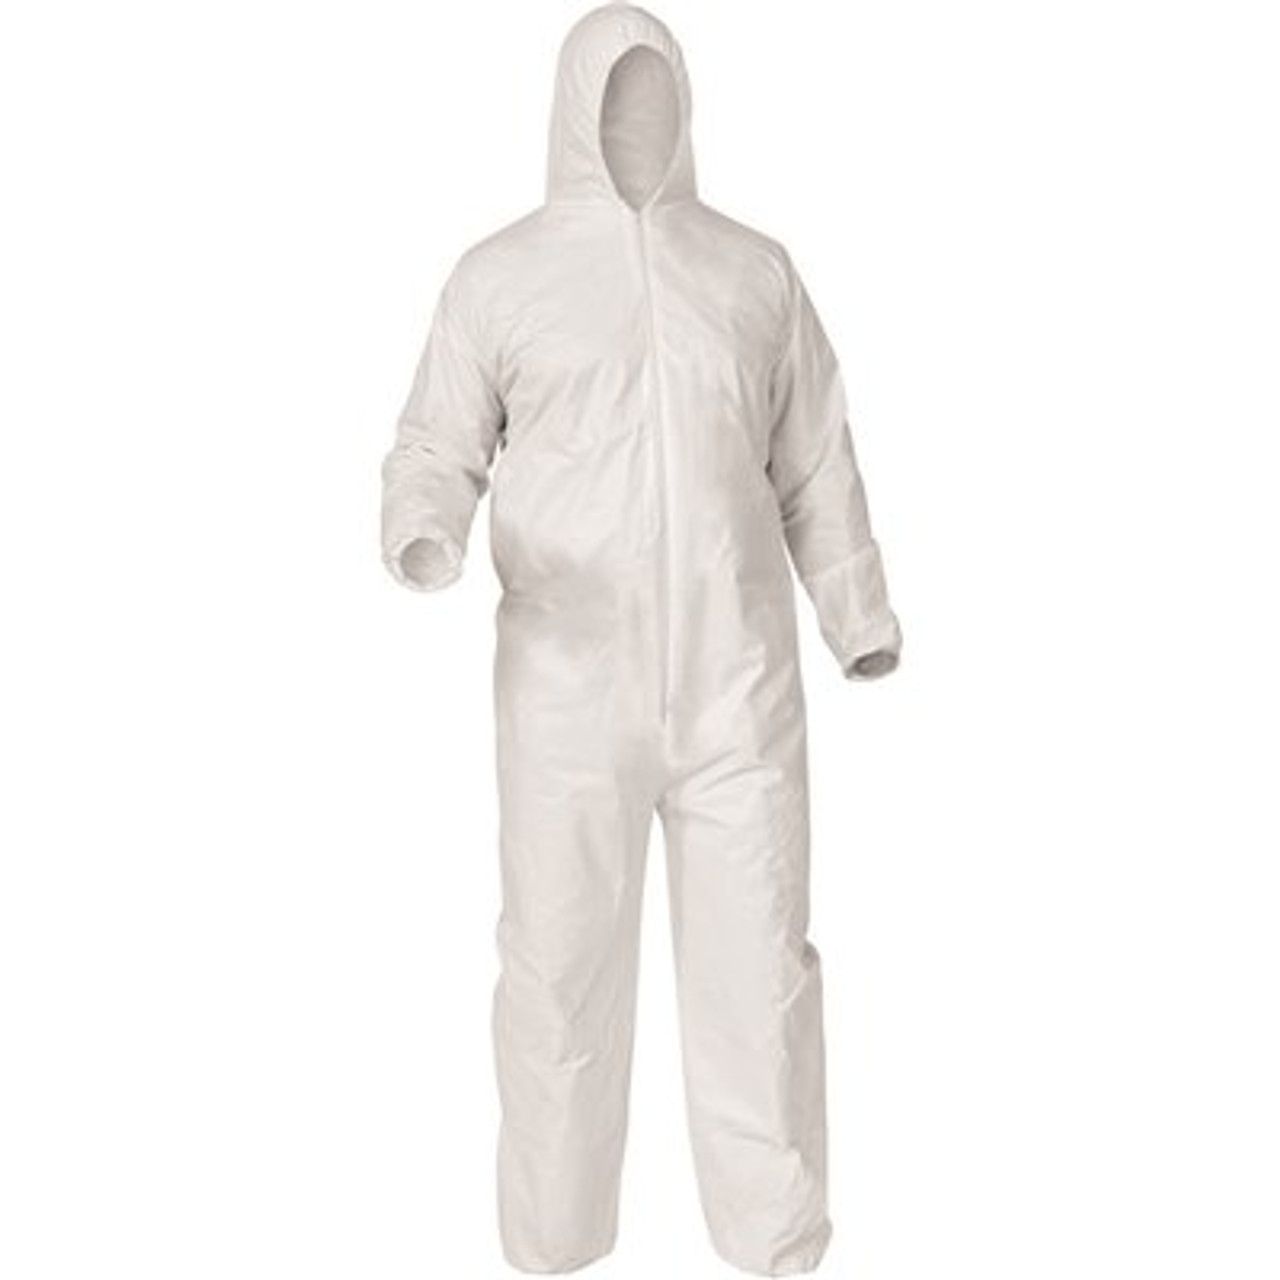 Kleenguard Unisex Small White Coverall Zip Front Elastic Wrist/Ankle With Collar (25-Pack)